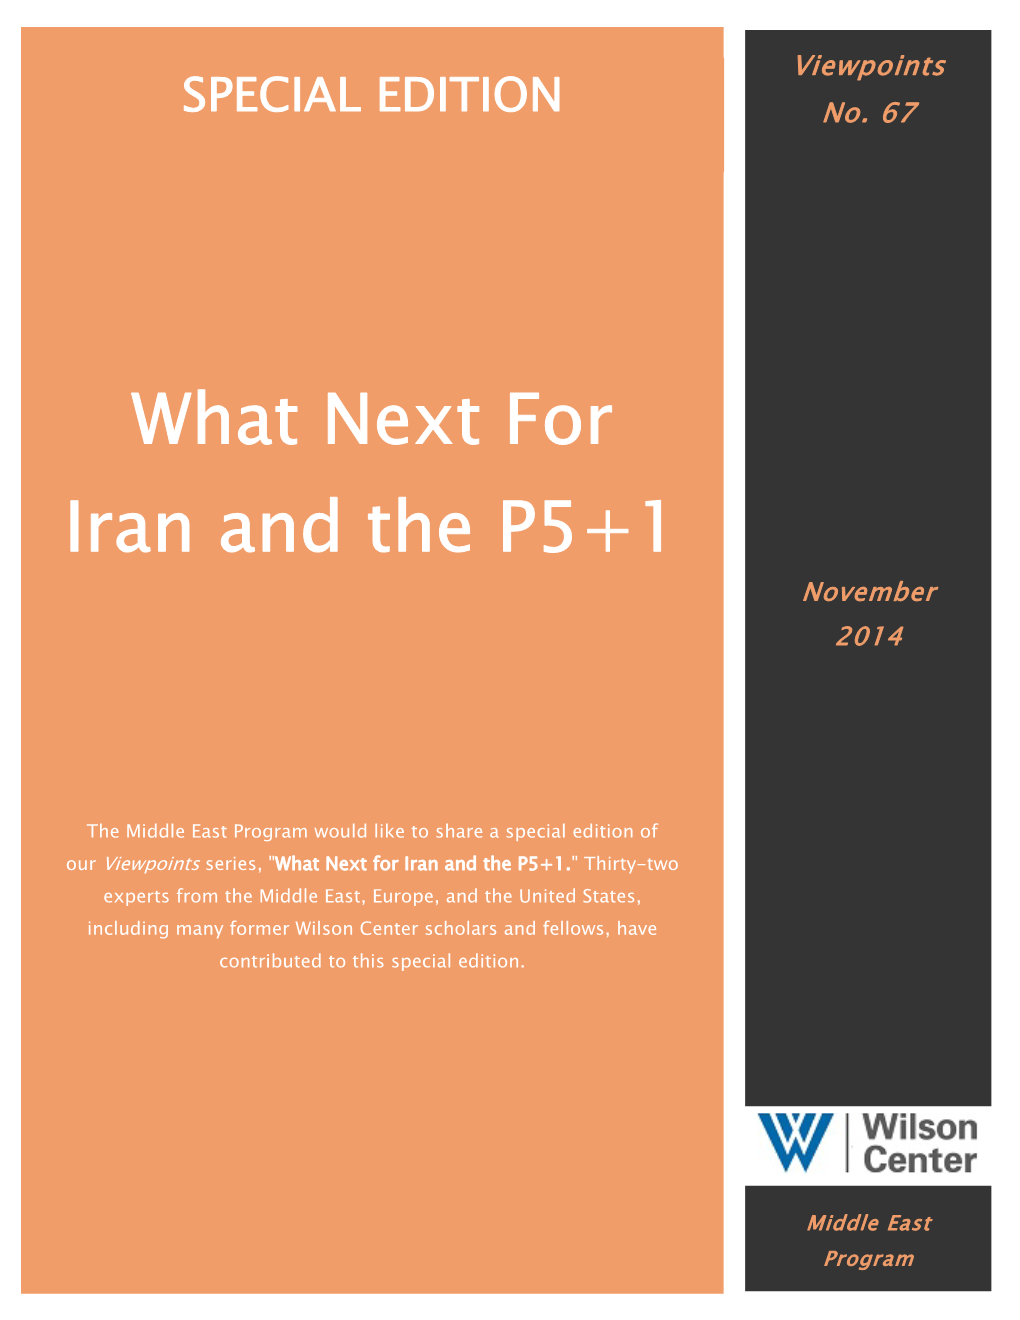 What Next for Iran and the P5+1." Thirty-Two